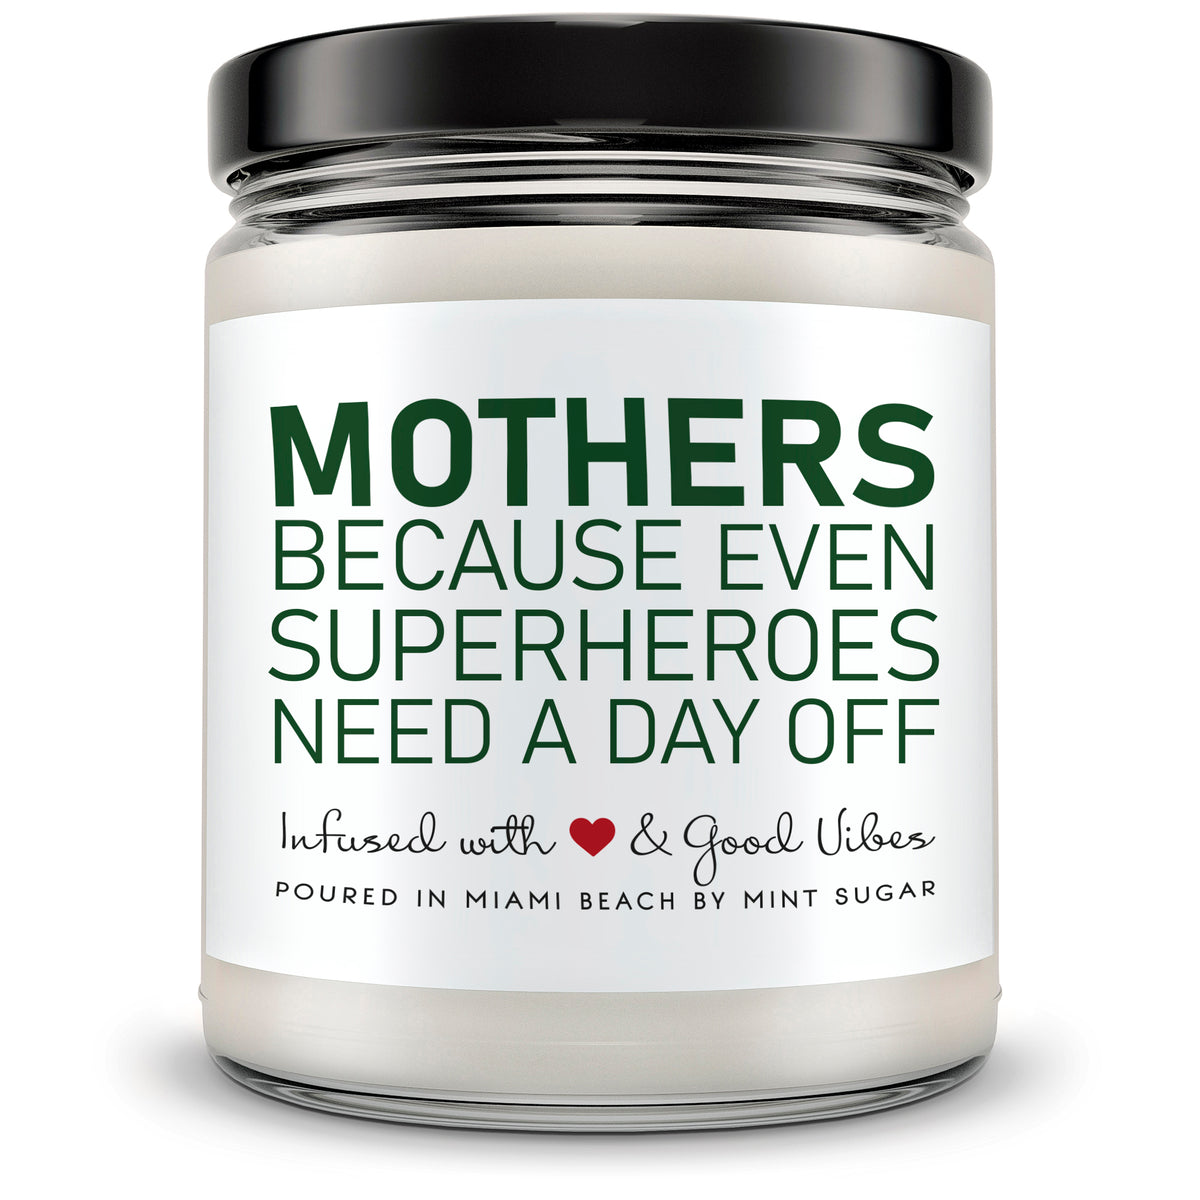 Moms Because Either Superheroes Need a Day Off - Mint Sugar Candle